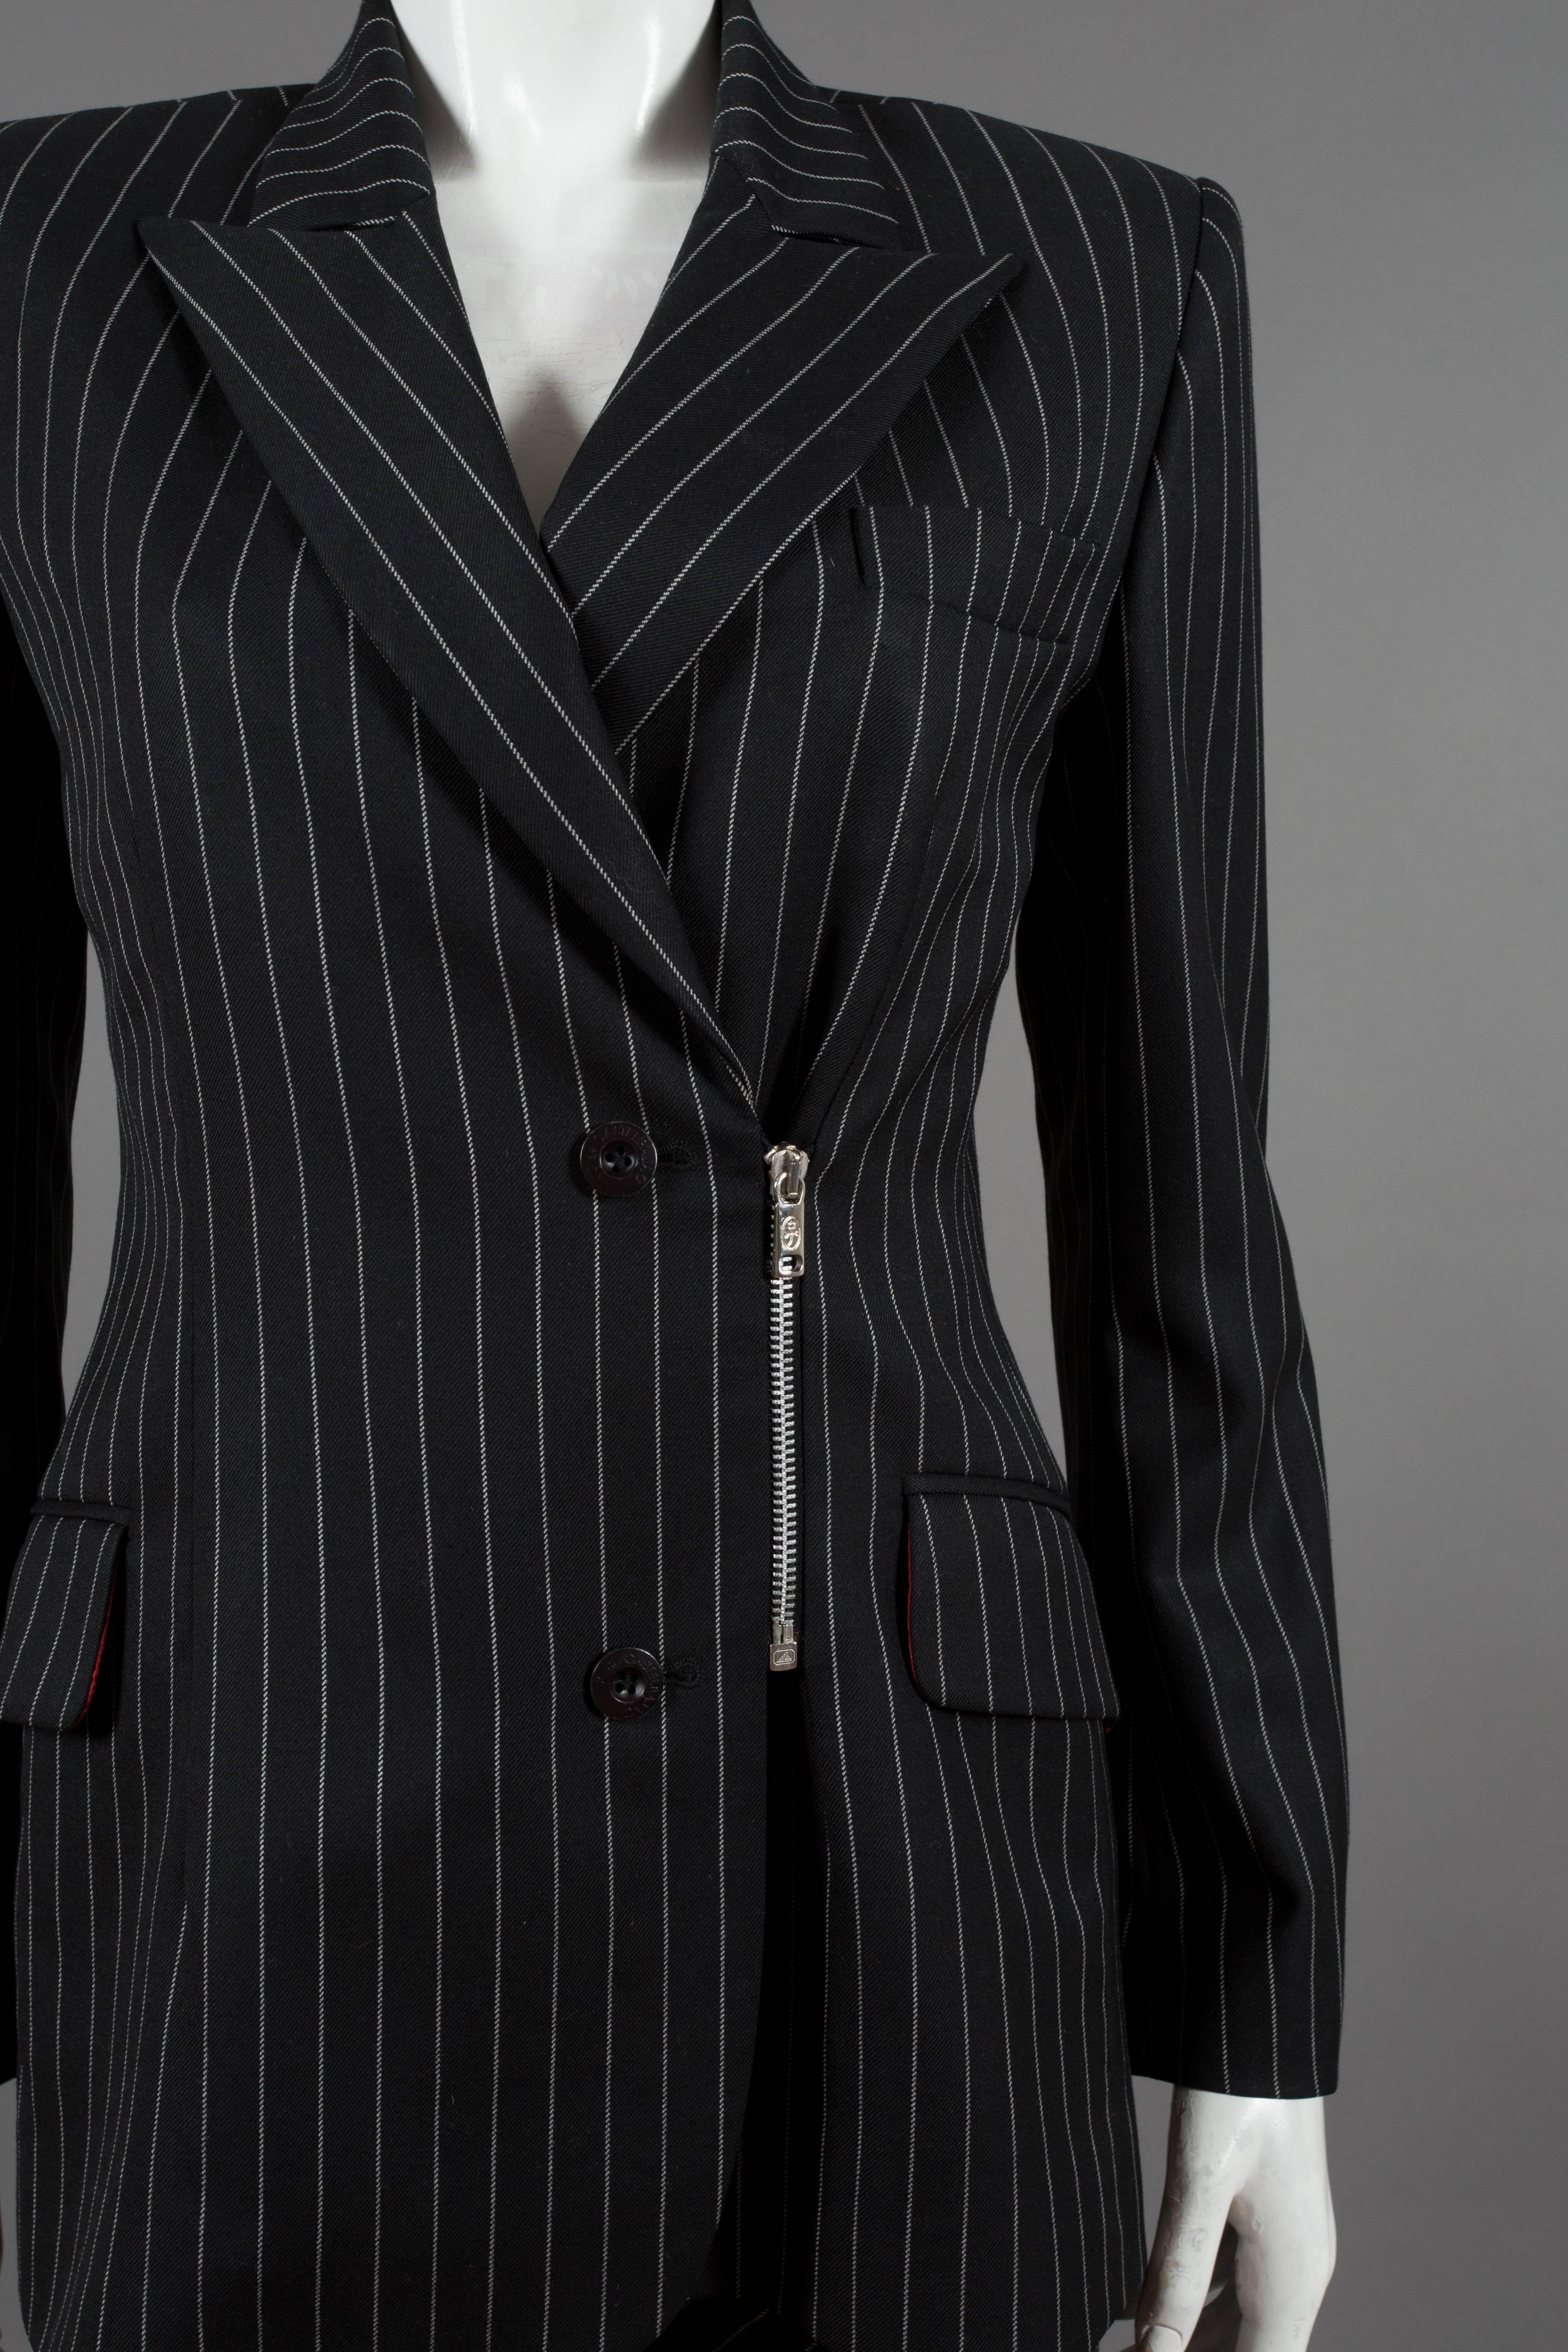 black and white pinstripe suit women's